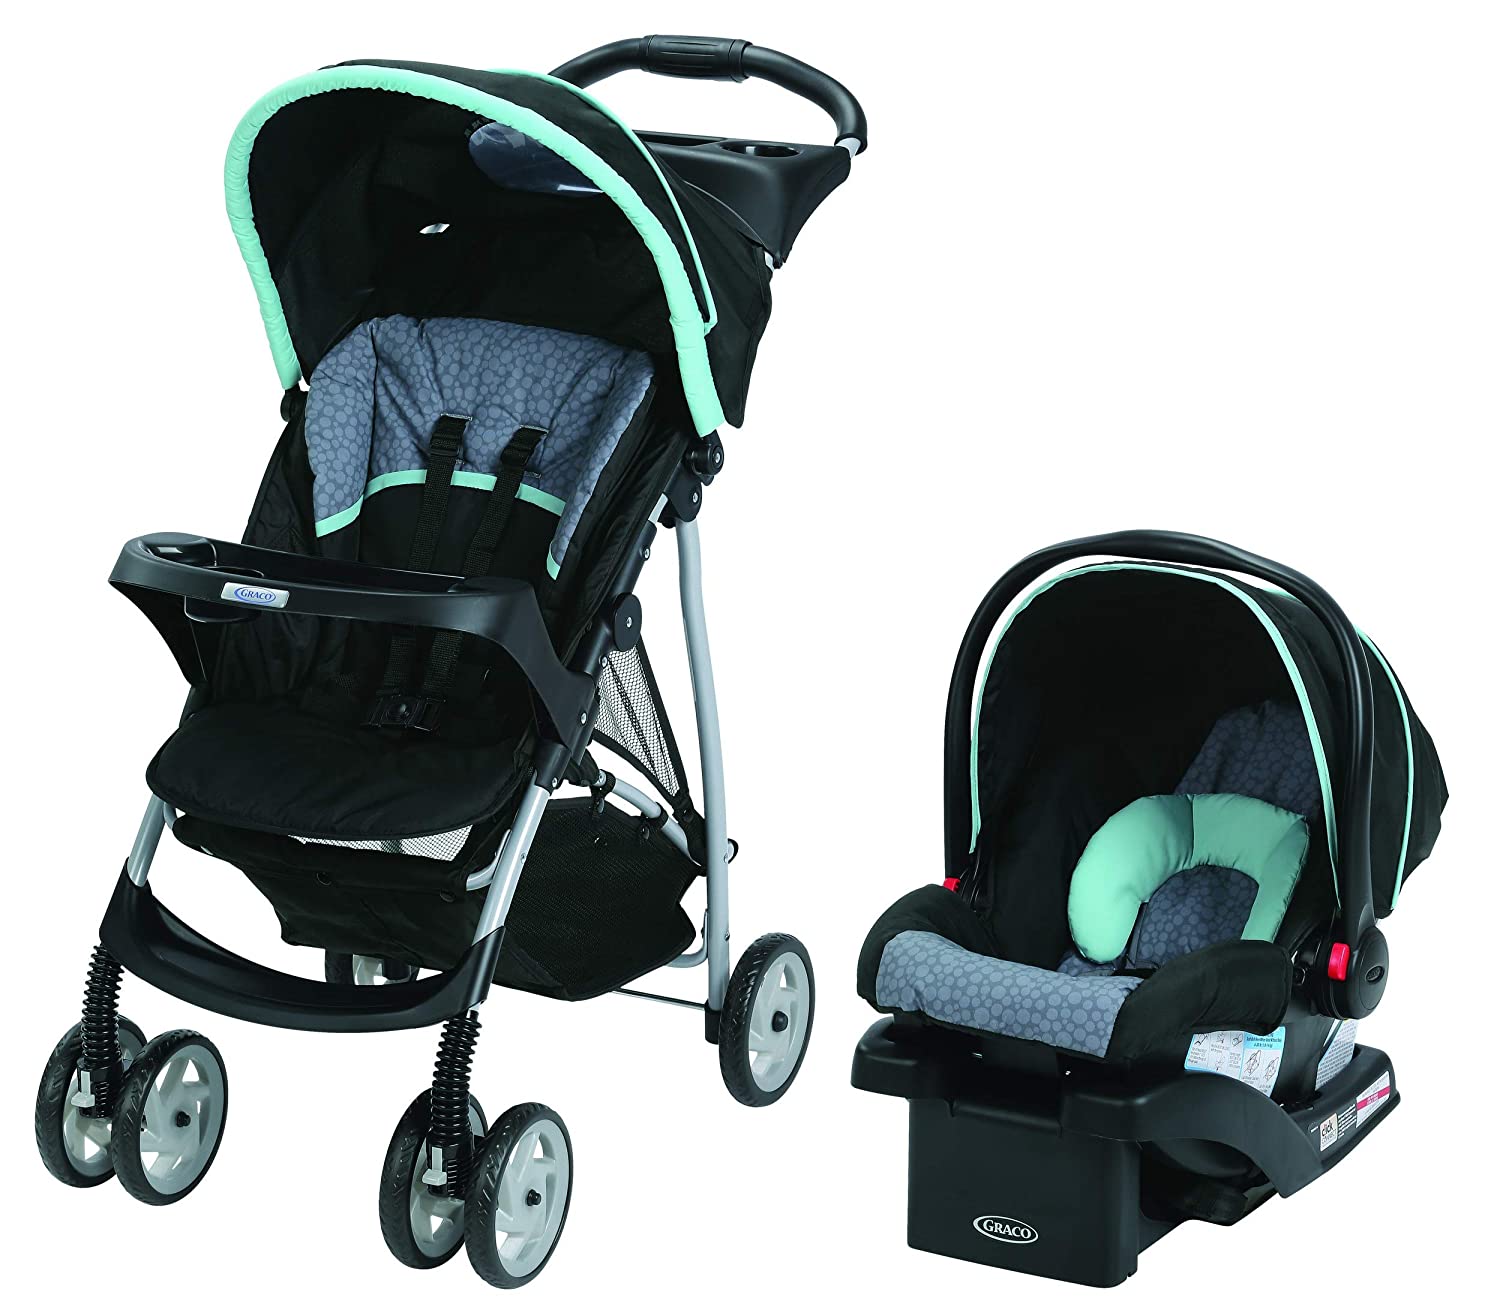 Top 5 Best Infant Travel Systems Reviews in 2023 1